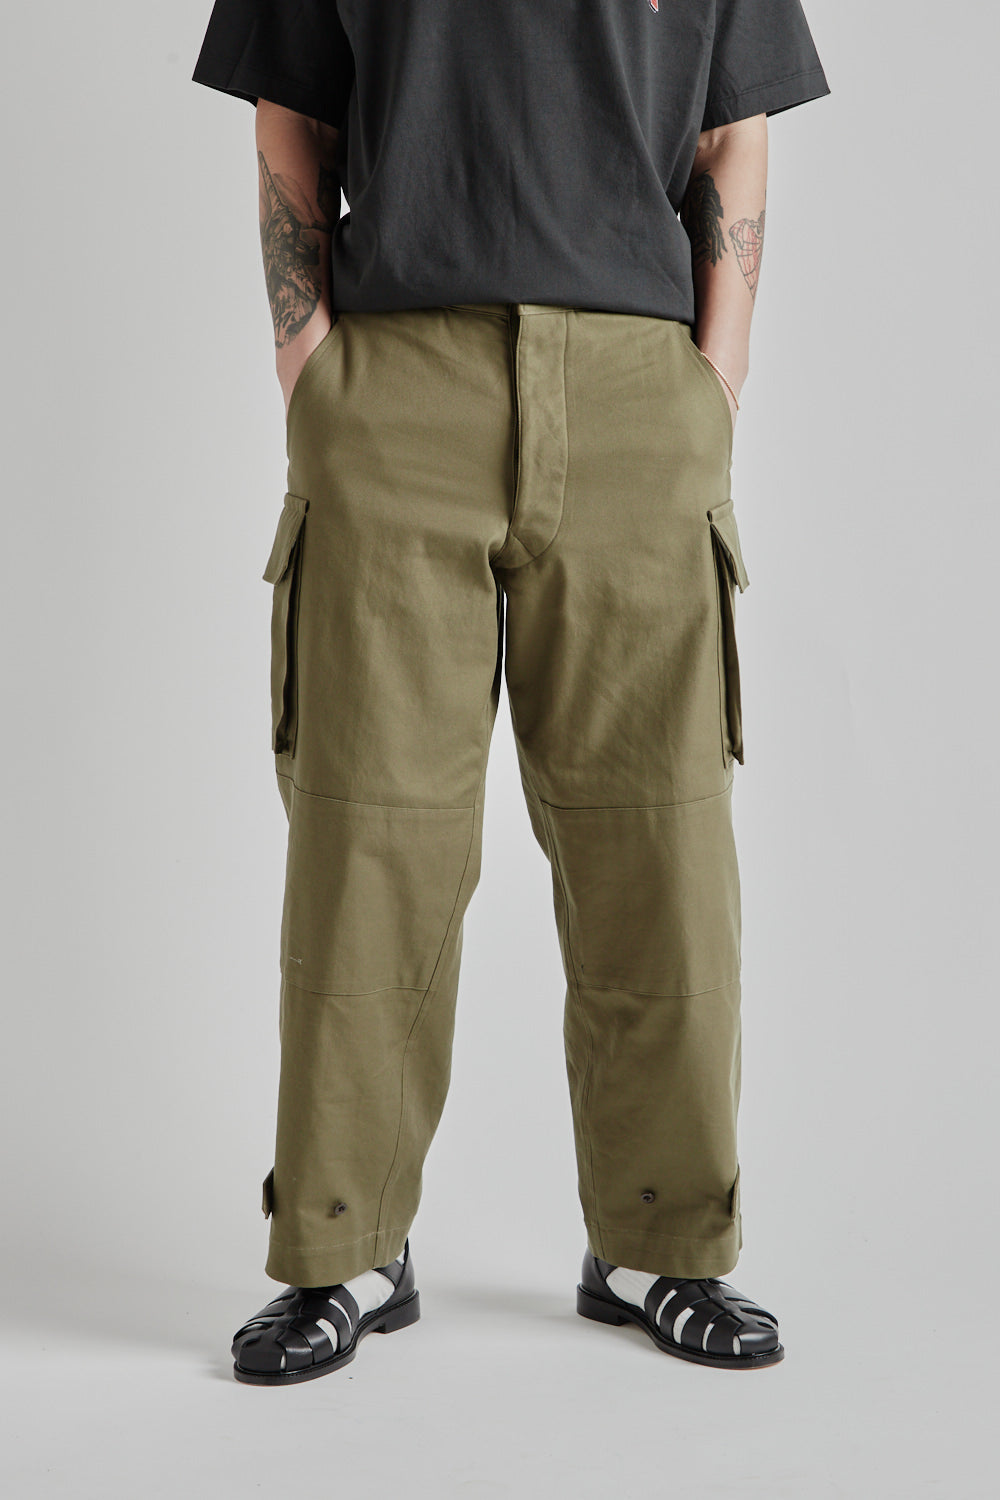 Blurhms Cotton Serge 47 Pants in Olive